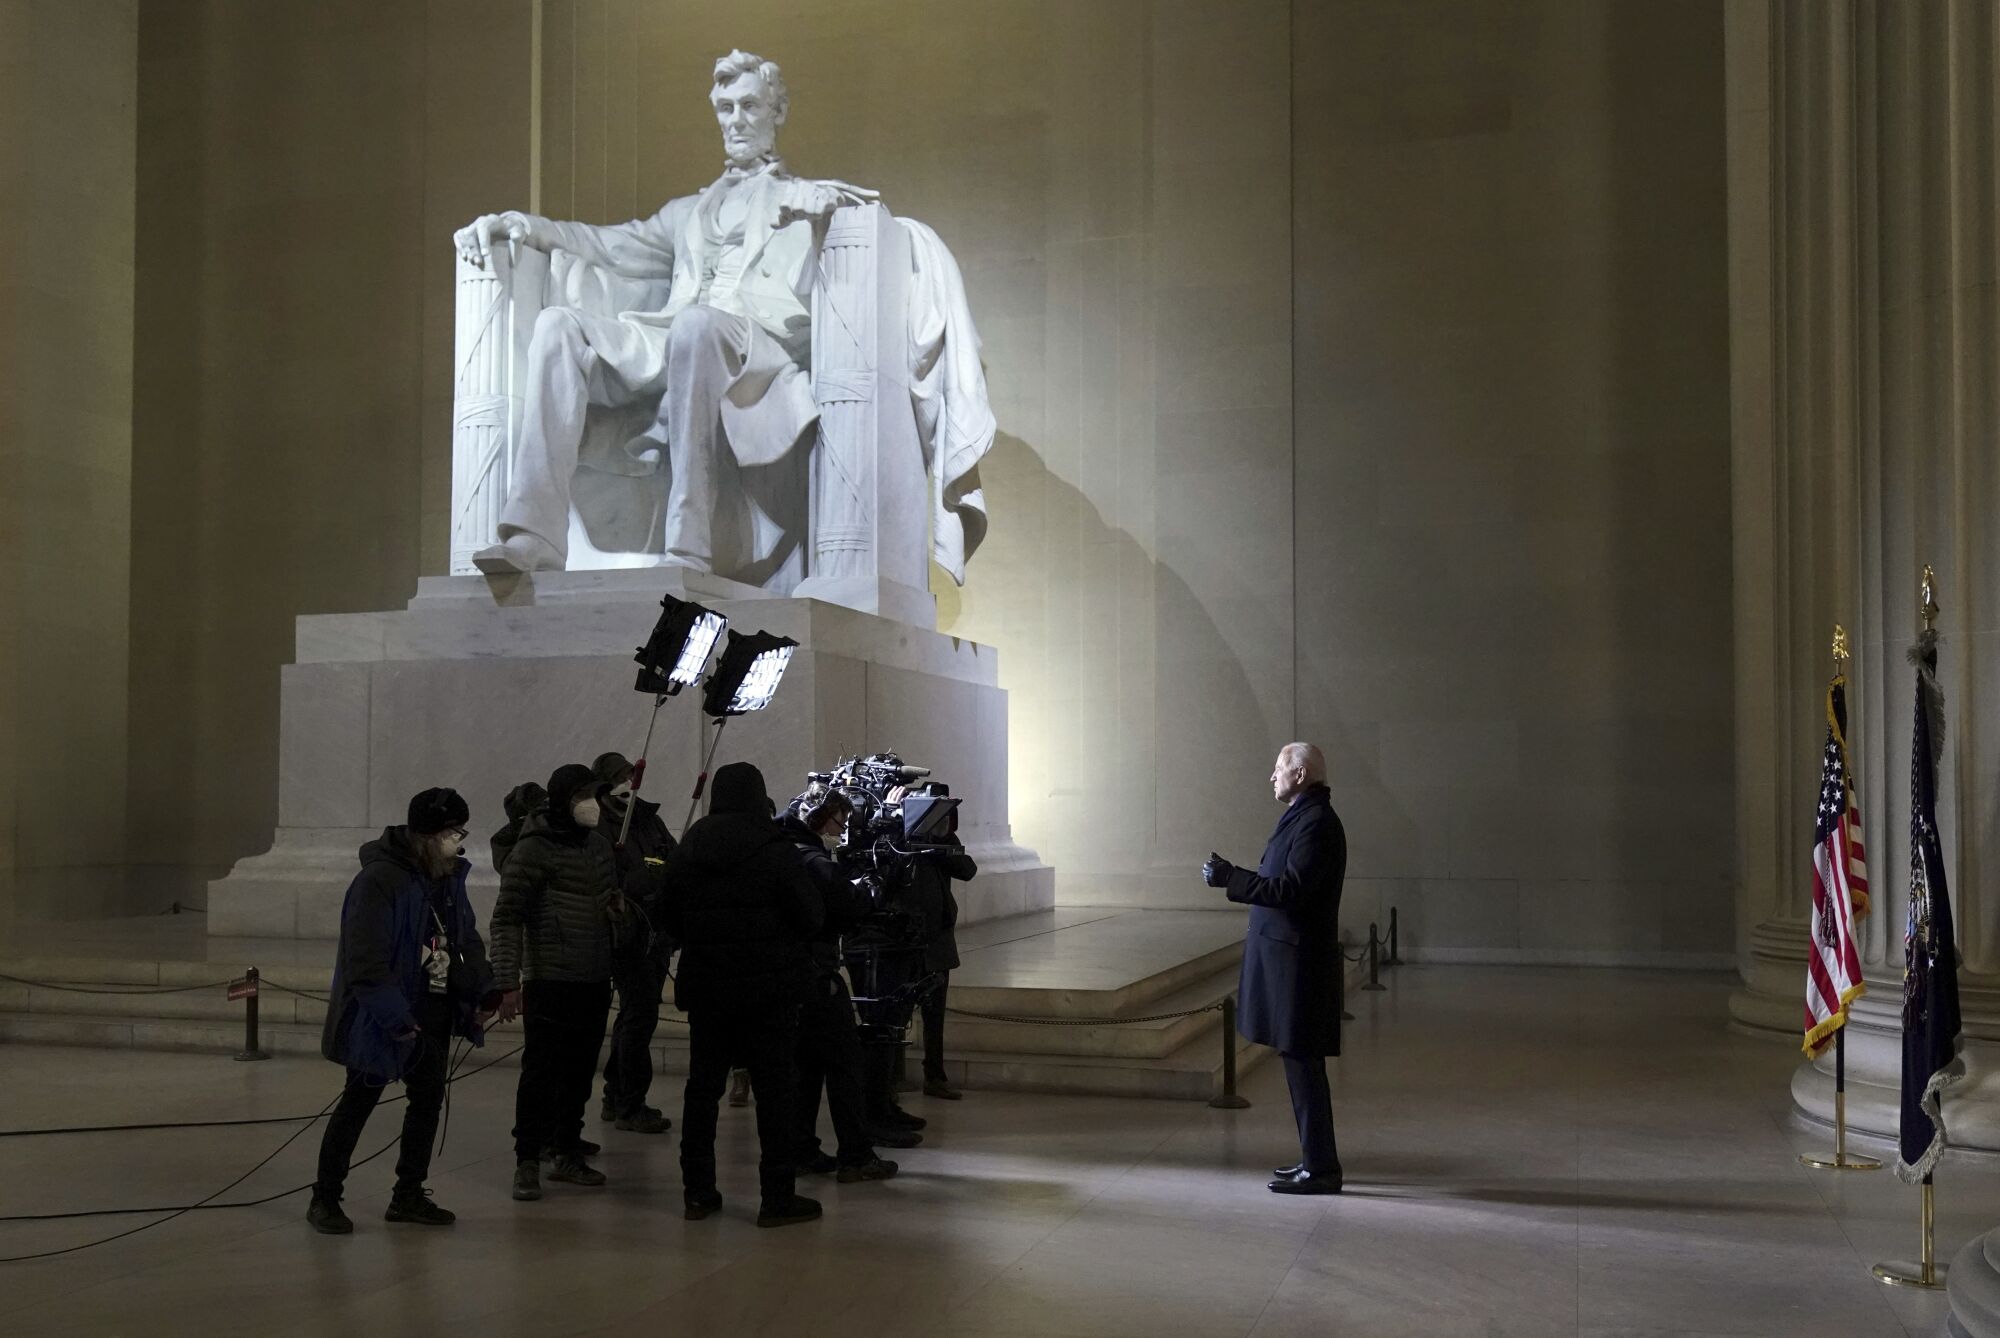 President Biden stands alongside the Lincoln Memorial with a small crowd of reporters and TV camera operators.